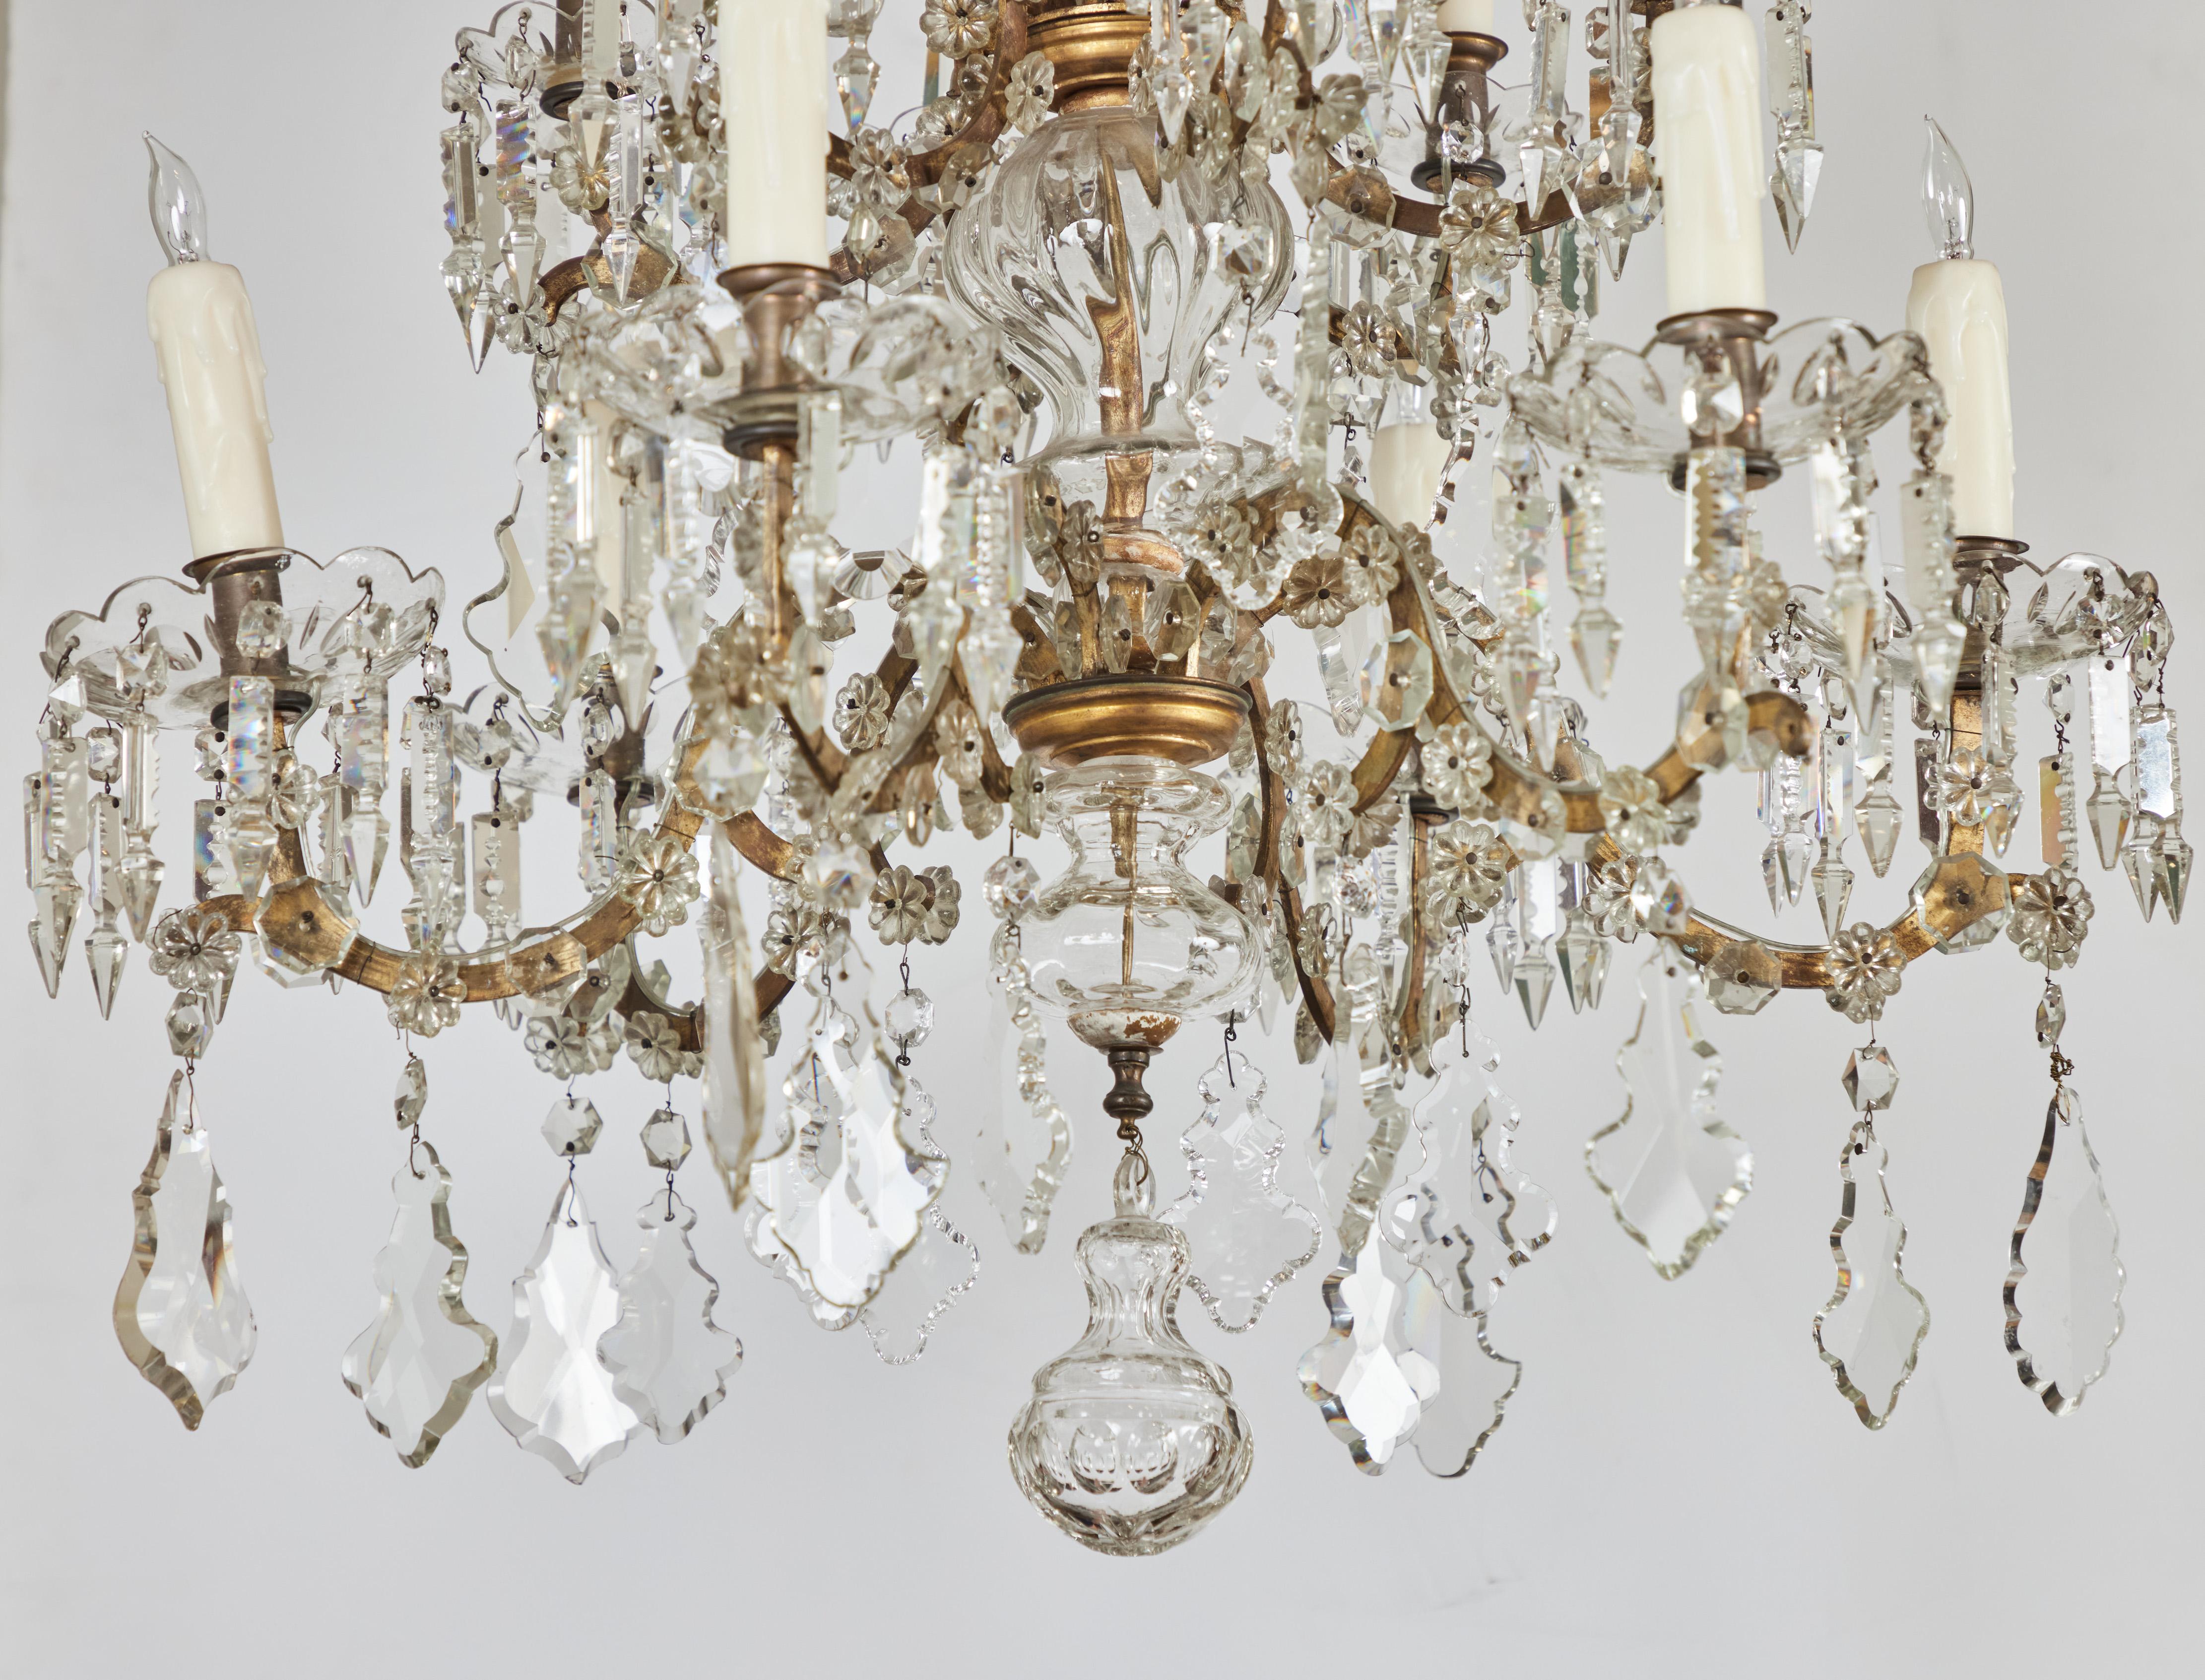 Elegant gilded metal and crystal chandelier with 12 lights. 2 Designs of scrolled placards and dramatic bobeches with hanging pendants. Wired for USA.